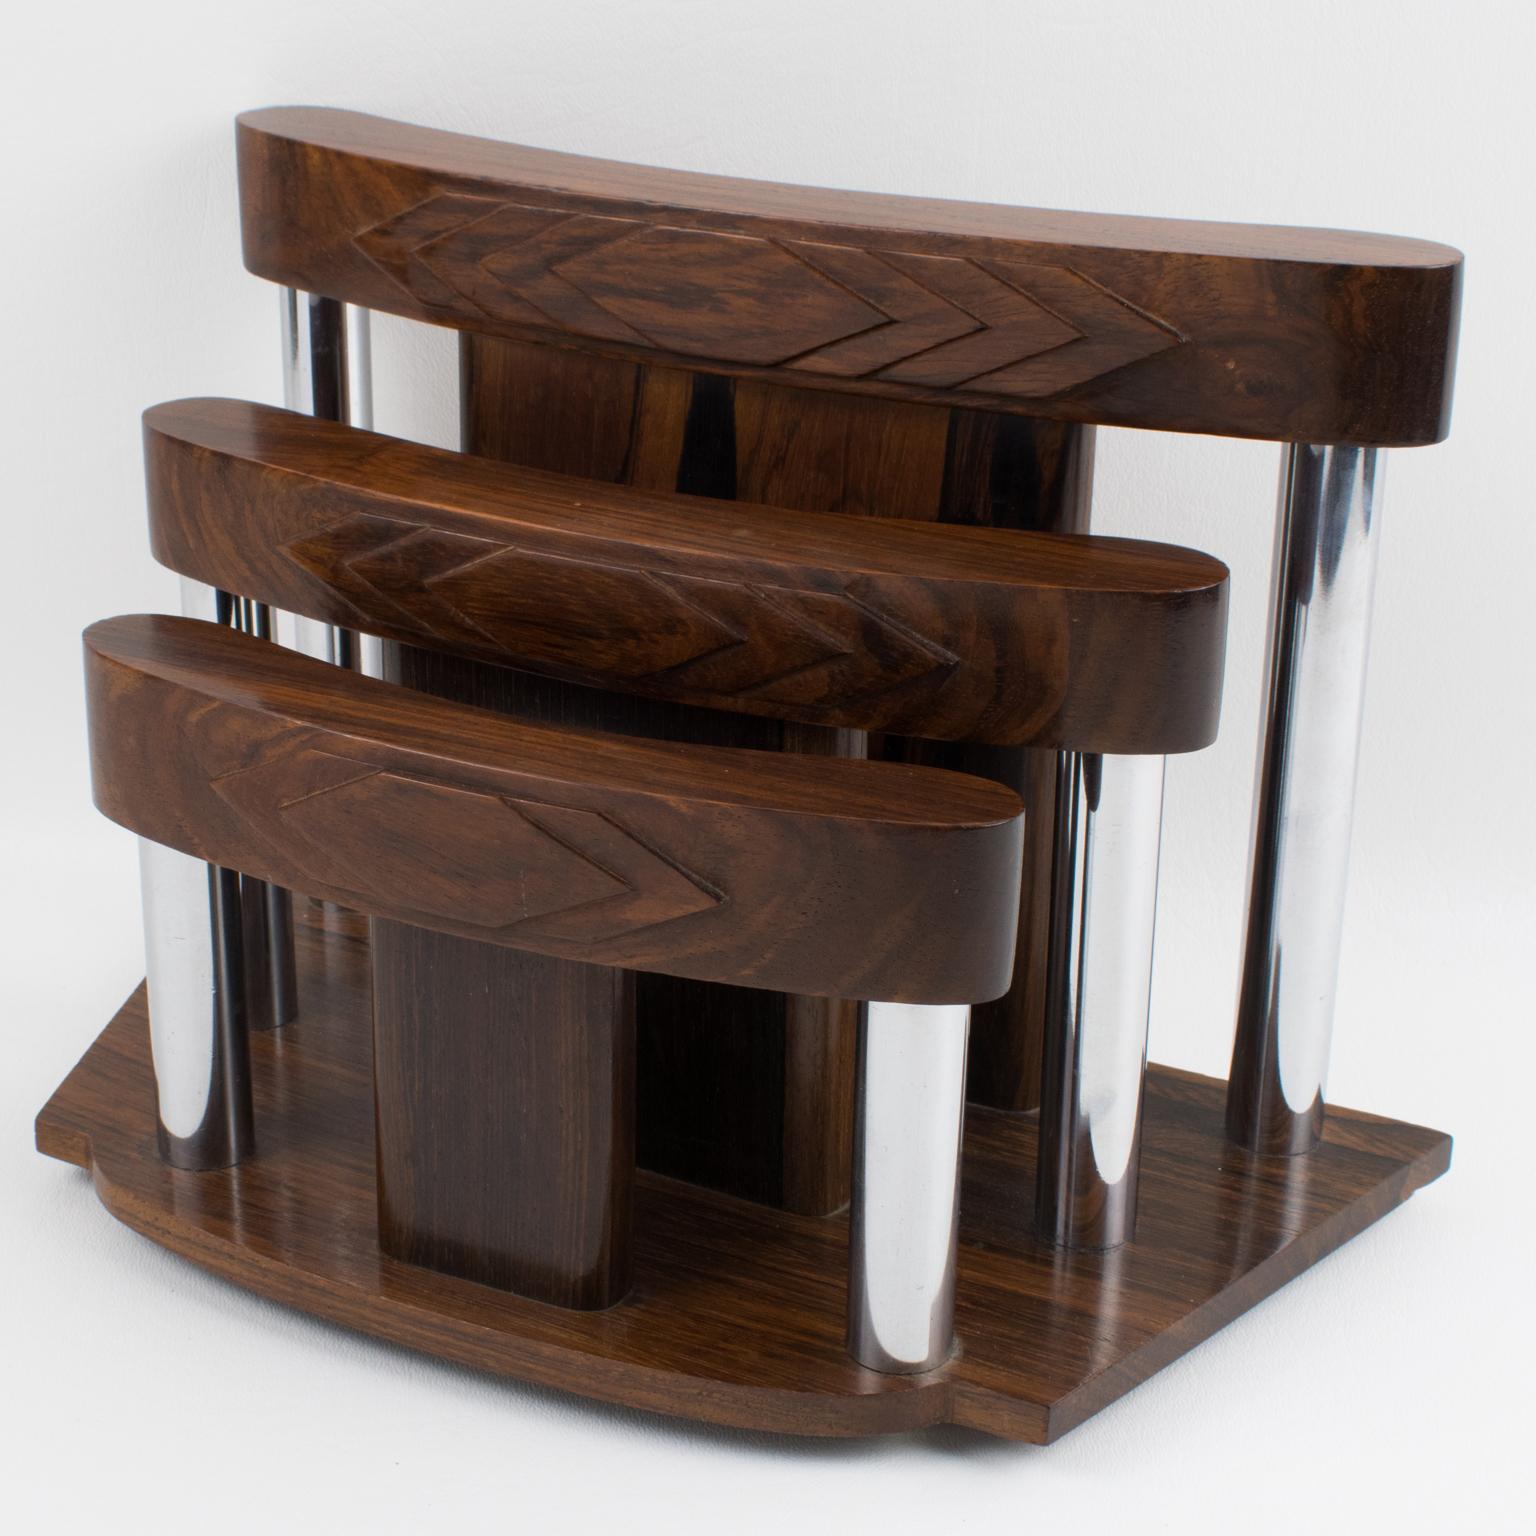 Art Deco modernist desk accessory, letter holder, France, circa 1930. Sleek geometric shape mail rack, with carved and shaped Macassar wood main body and chromed metal accents. There is no visible maker's mark. 
Measurements: 11.82 in. wide (30 cm)